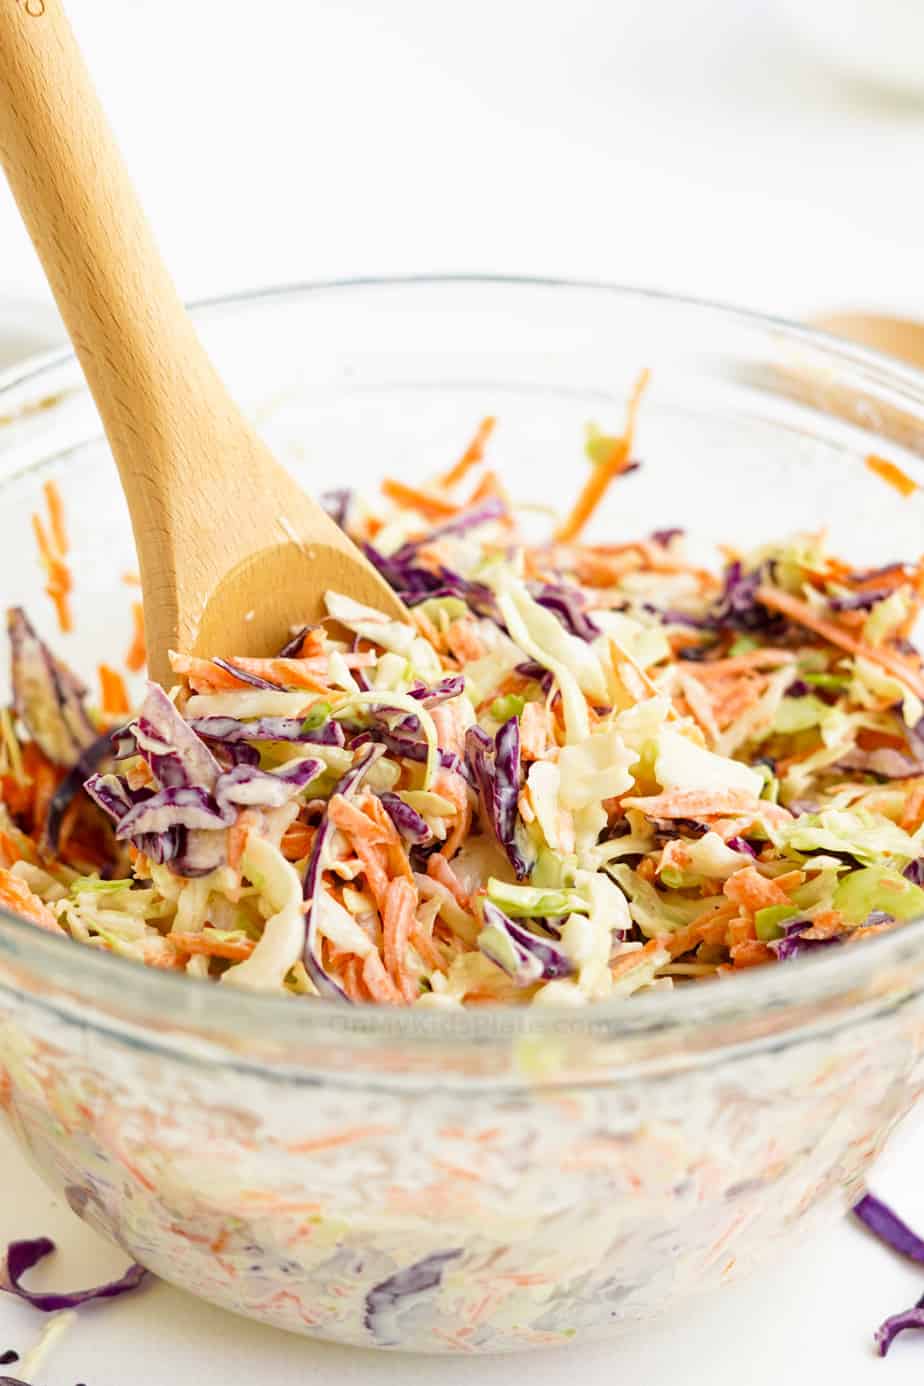 Mixing cabbage with dressing to make coleslaw in a large clear bowl from the side with a wooden spoon.